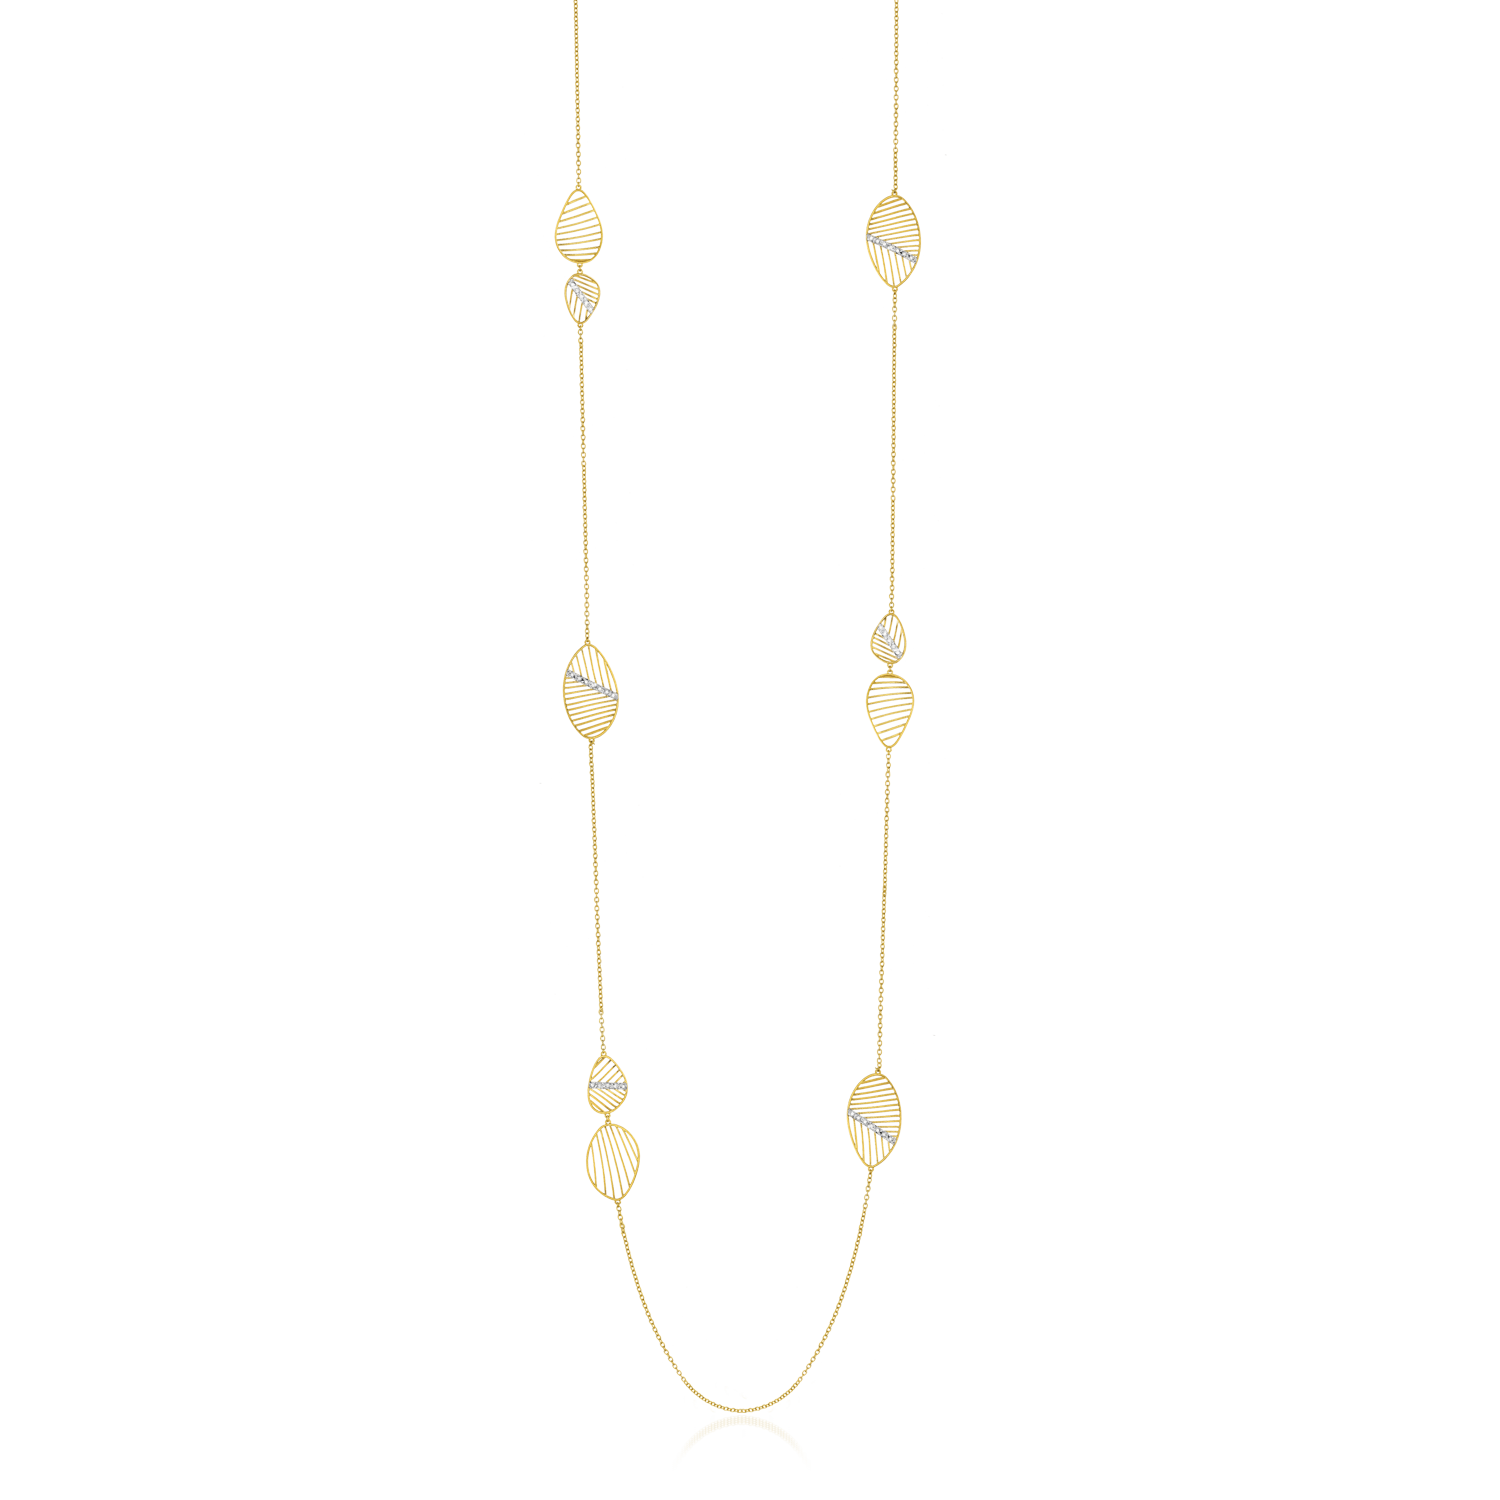 TRIBE Gold Necklace with Diamonds